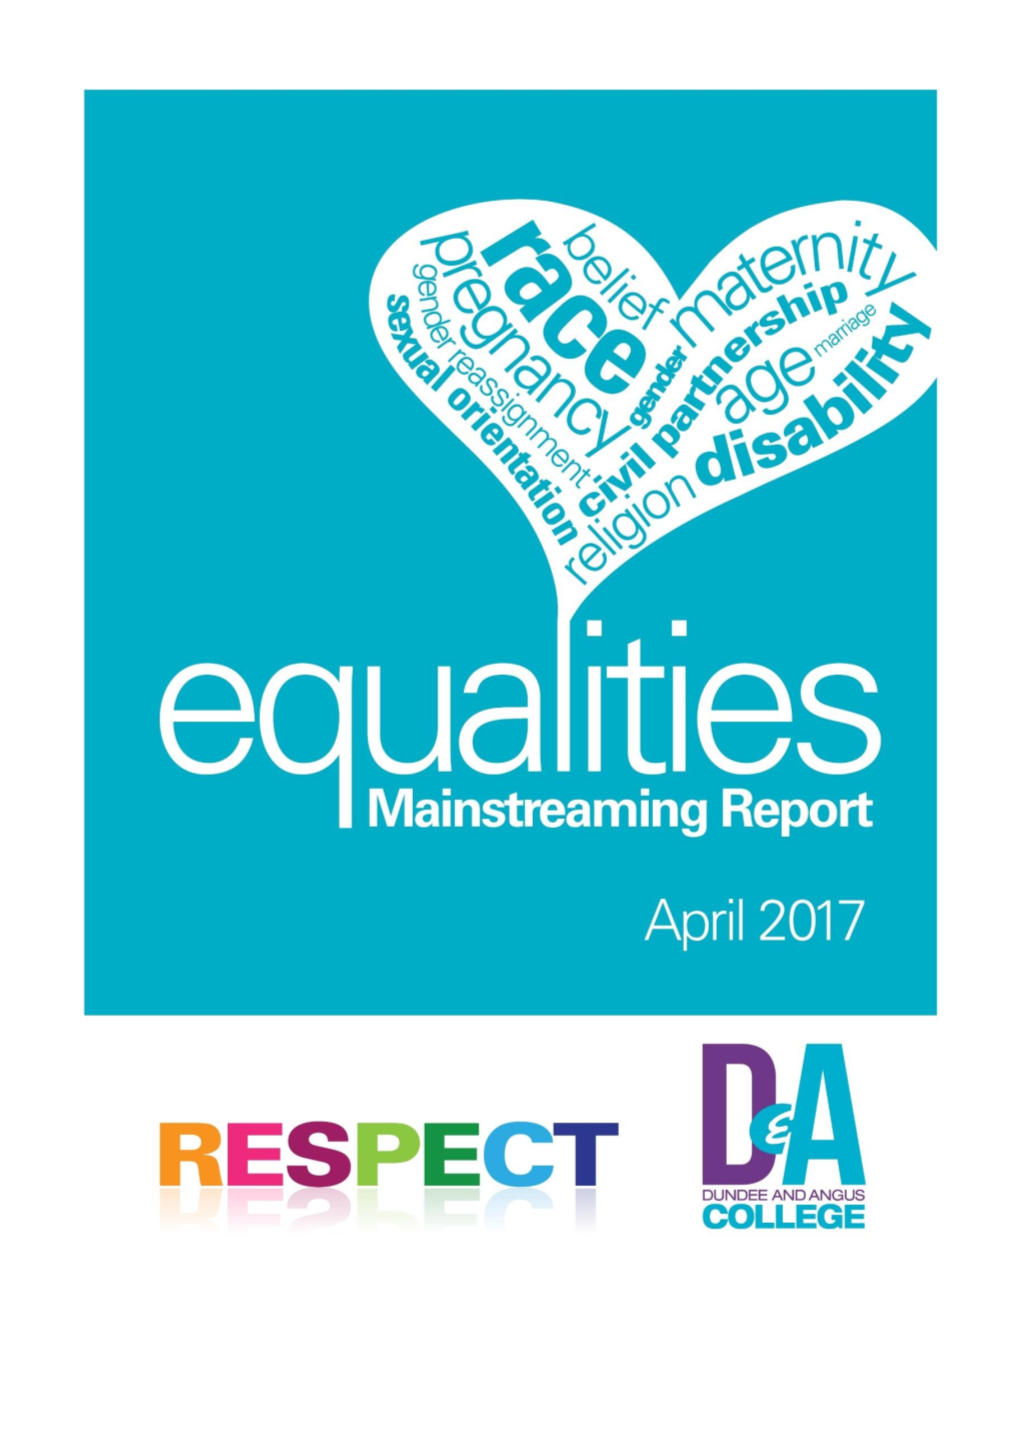 4. Dundee and Angus College Equality Activities